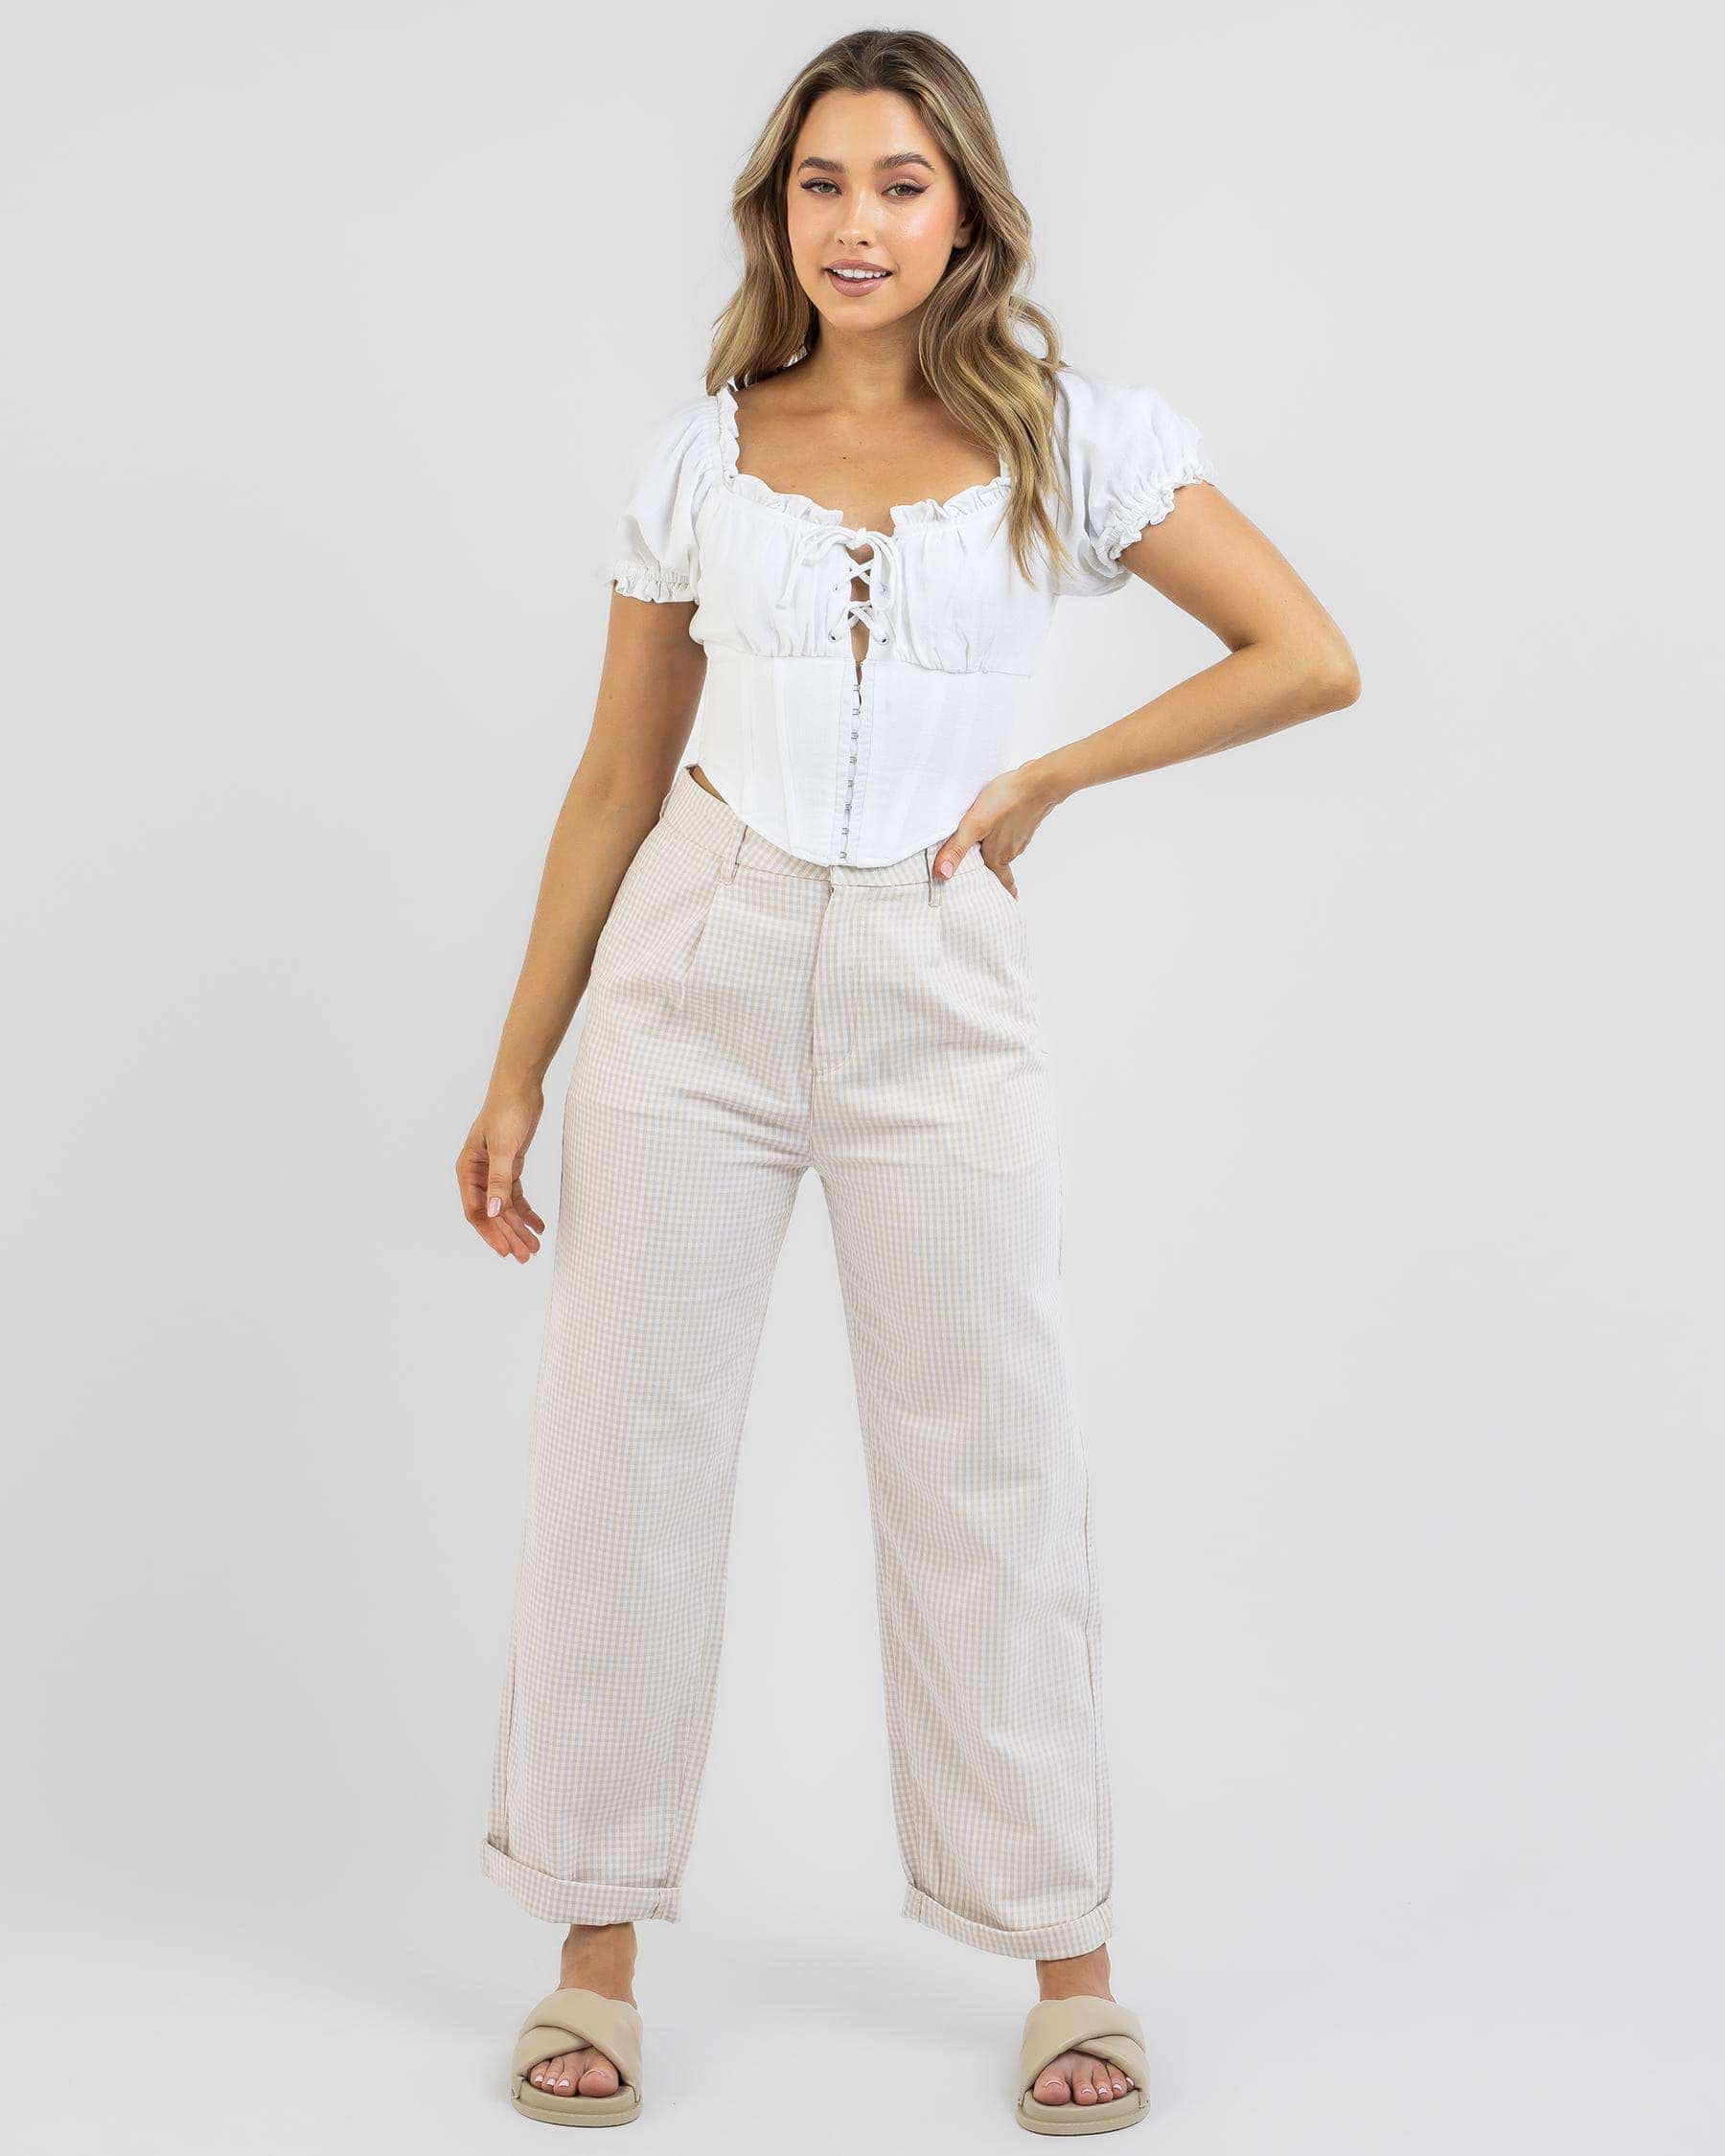 Shop Brixton Victory Pants In Beige Gingham - Fast Shipping & Easy ...